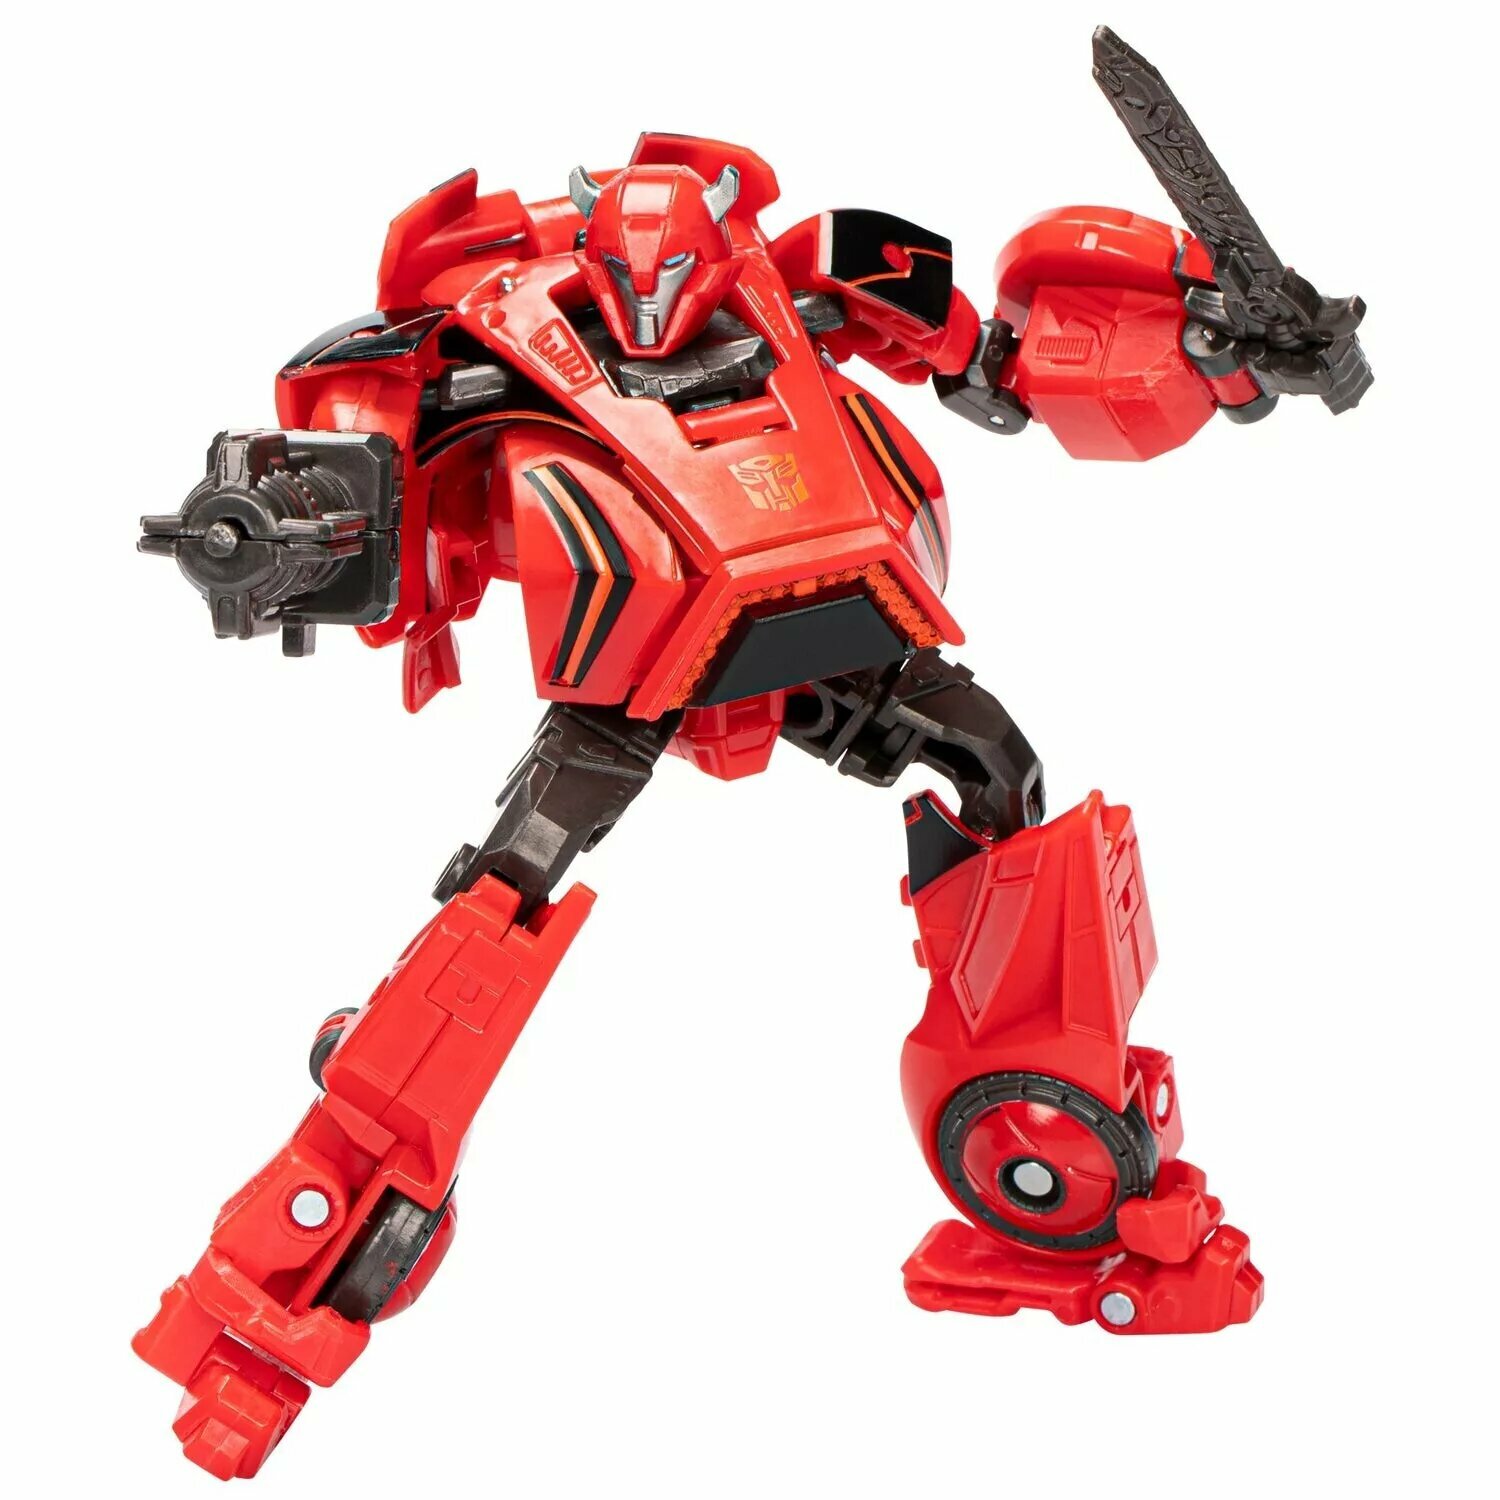 Фигурка Transformers Studio Series Deluxe Cliffjumper Gamer Edition 05, inspired by the video game "Transformers: War for Cybertron" 5010996165817